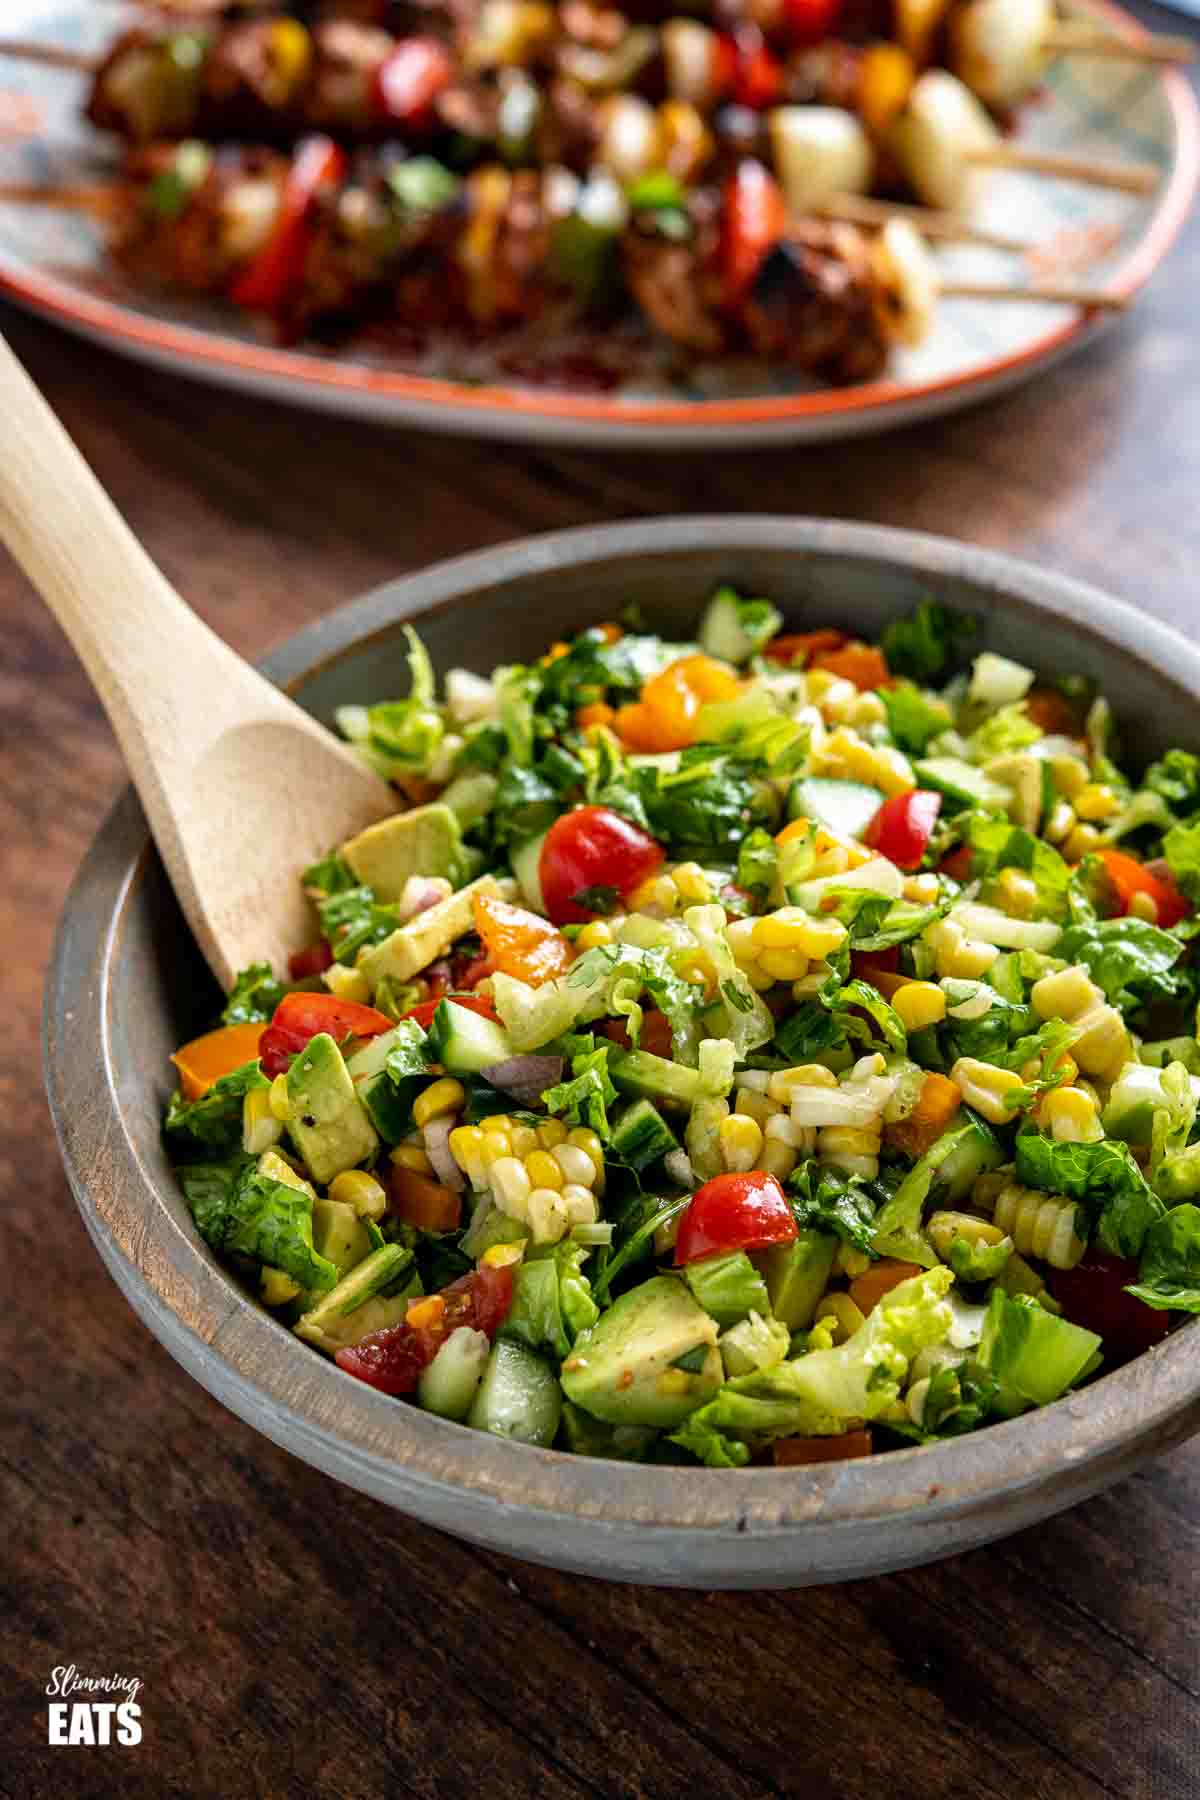 chopped salad in wooden bowl with wooden spoons with plate of chicken skewers behind